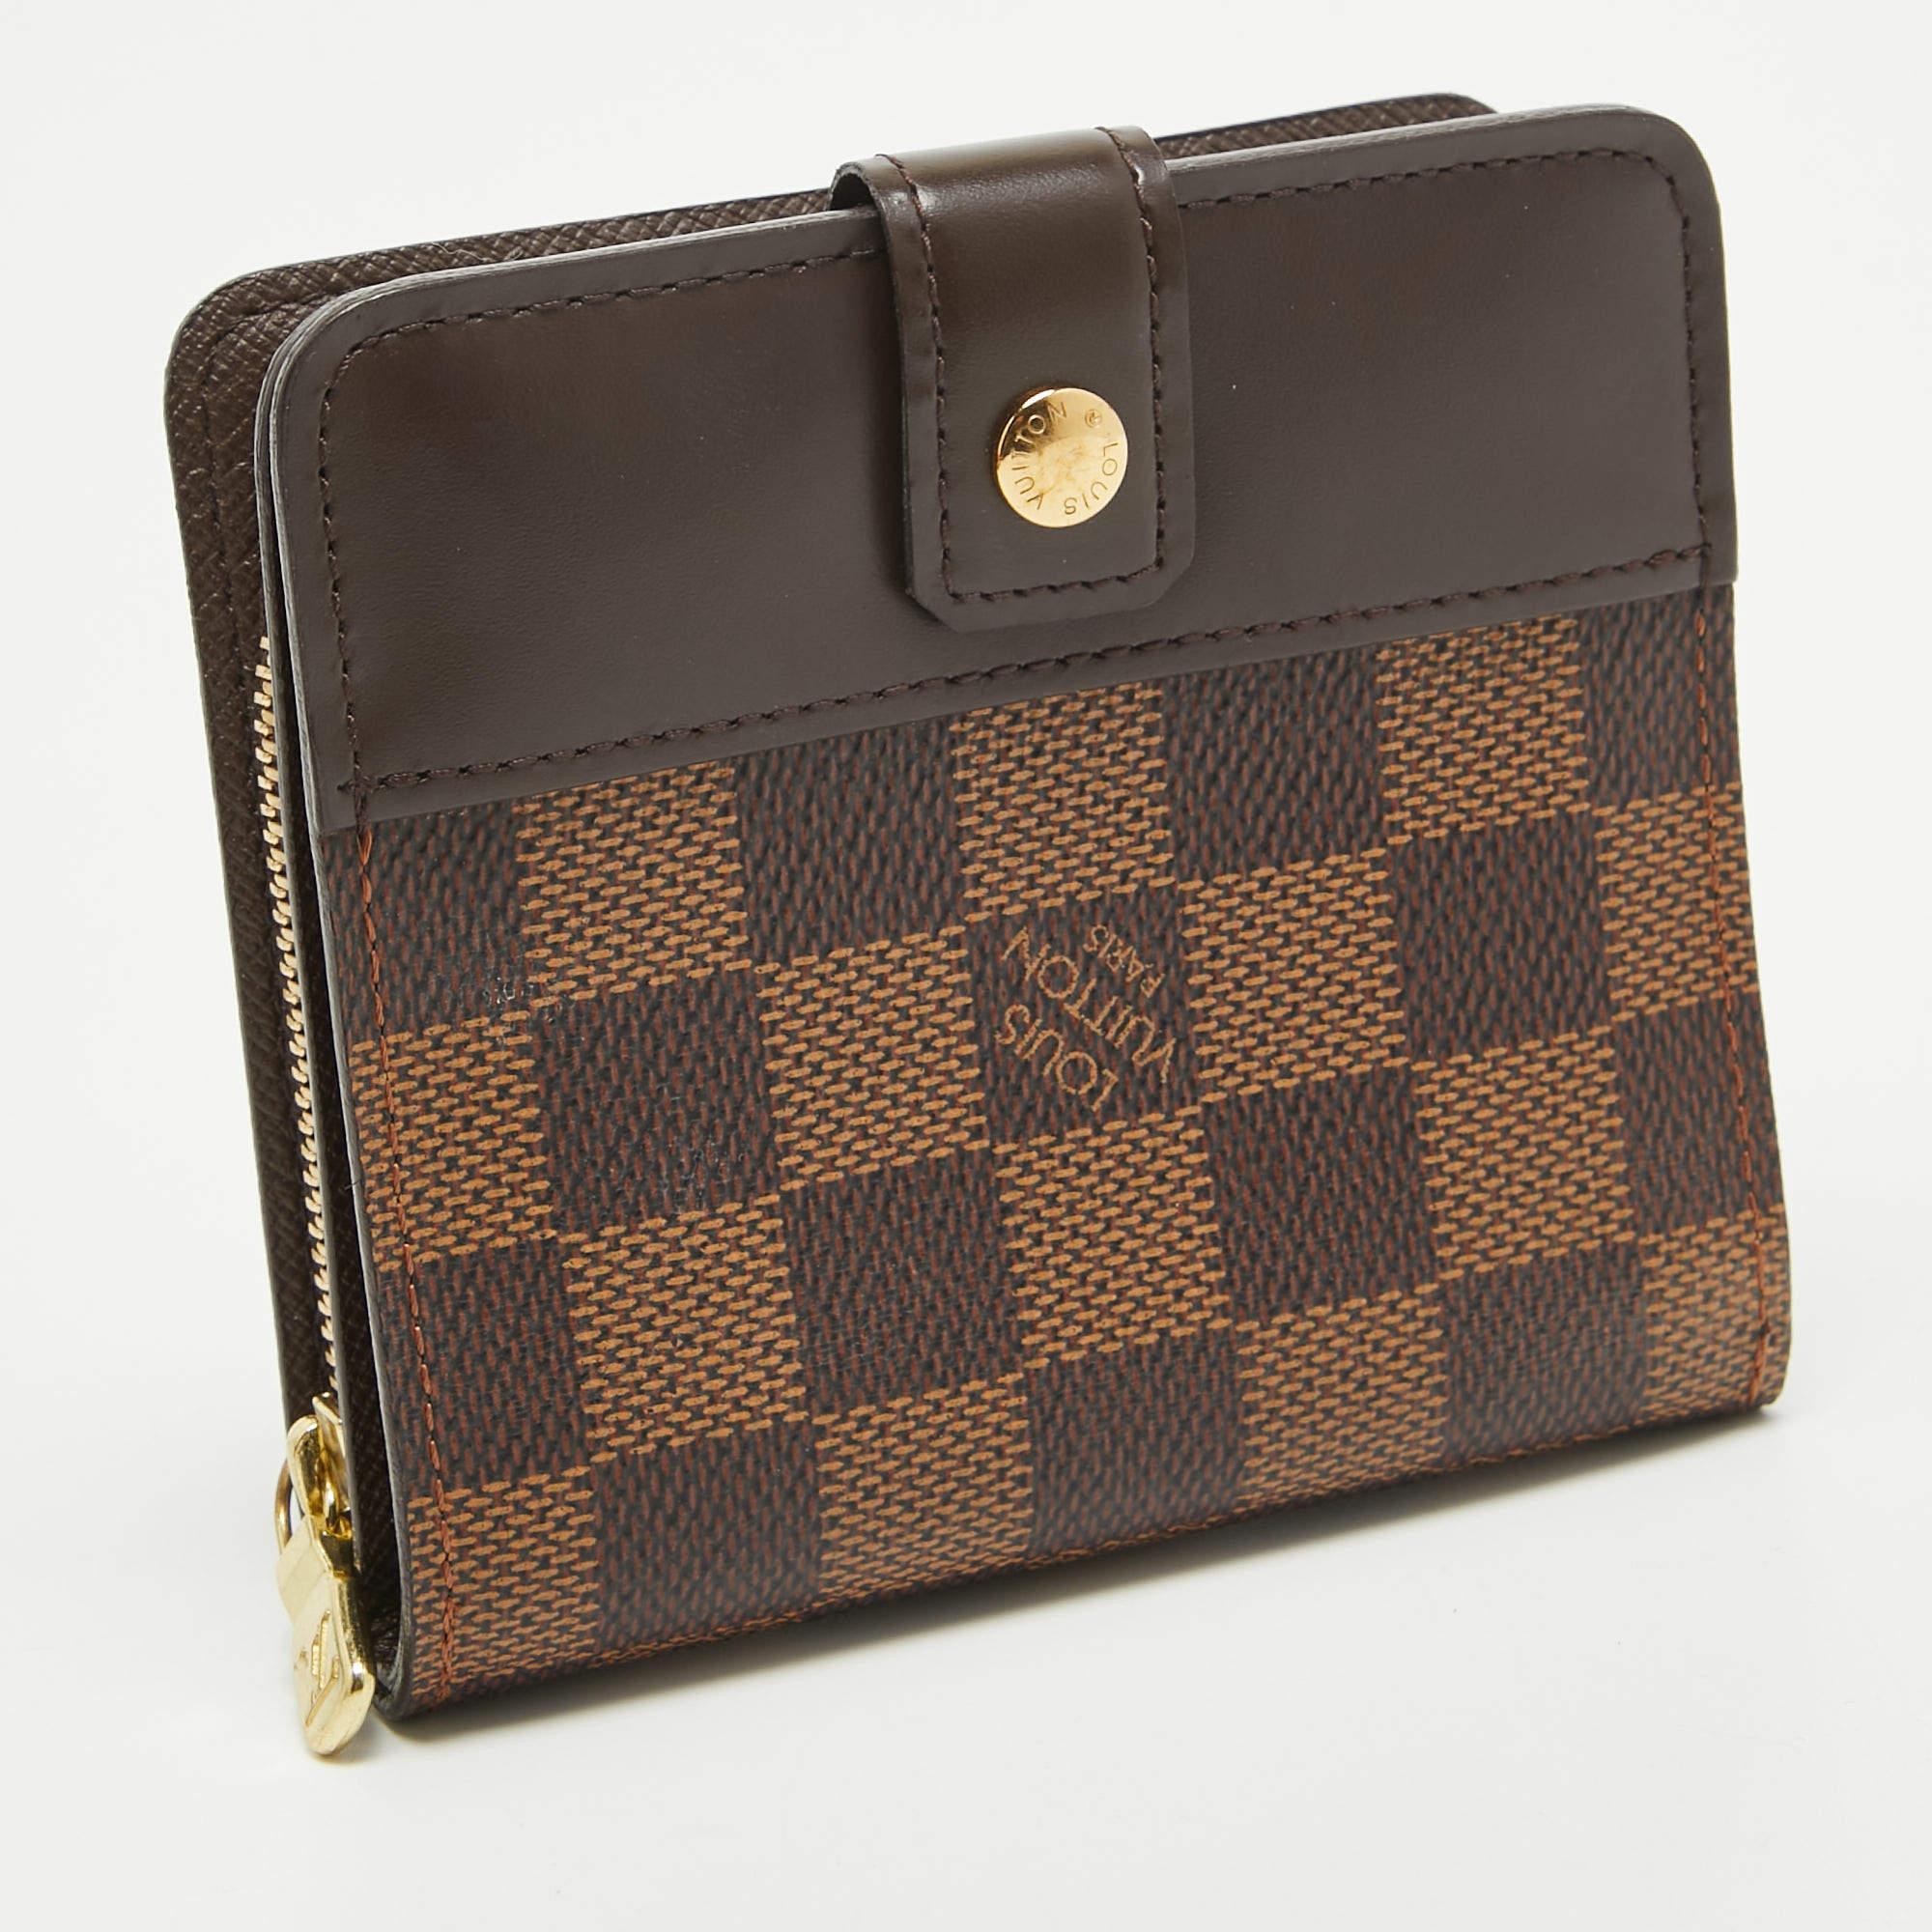 A beautiful wallet for everyday use, this LV wallet is perfect to be carried solo or inside your tote while you step out to run errands. It is a durable accessory.

